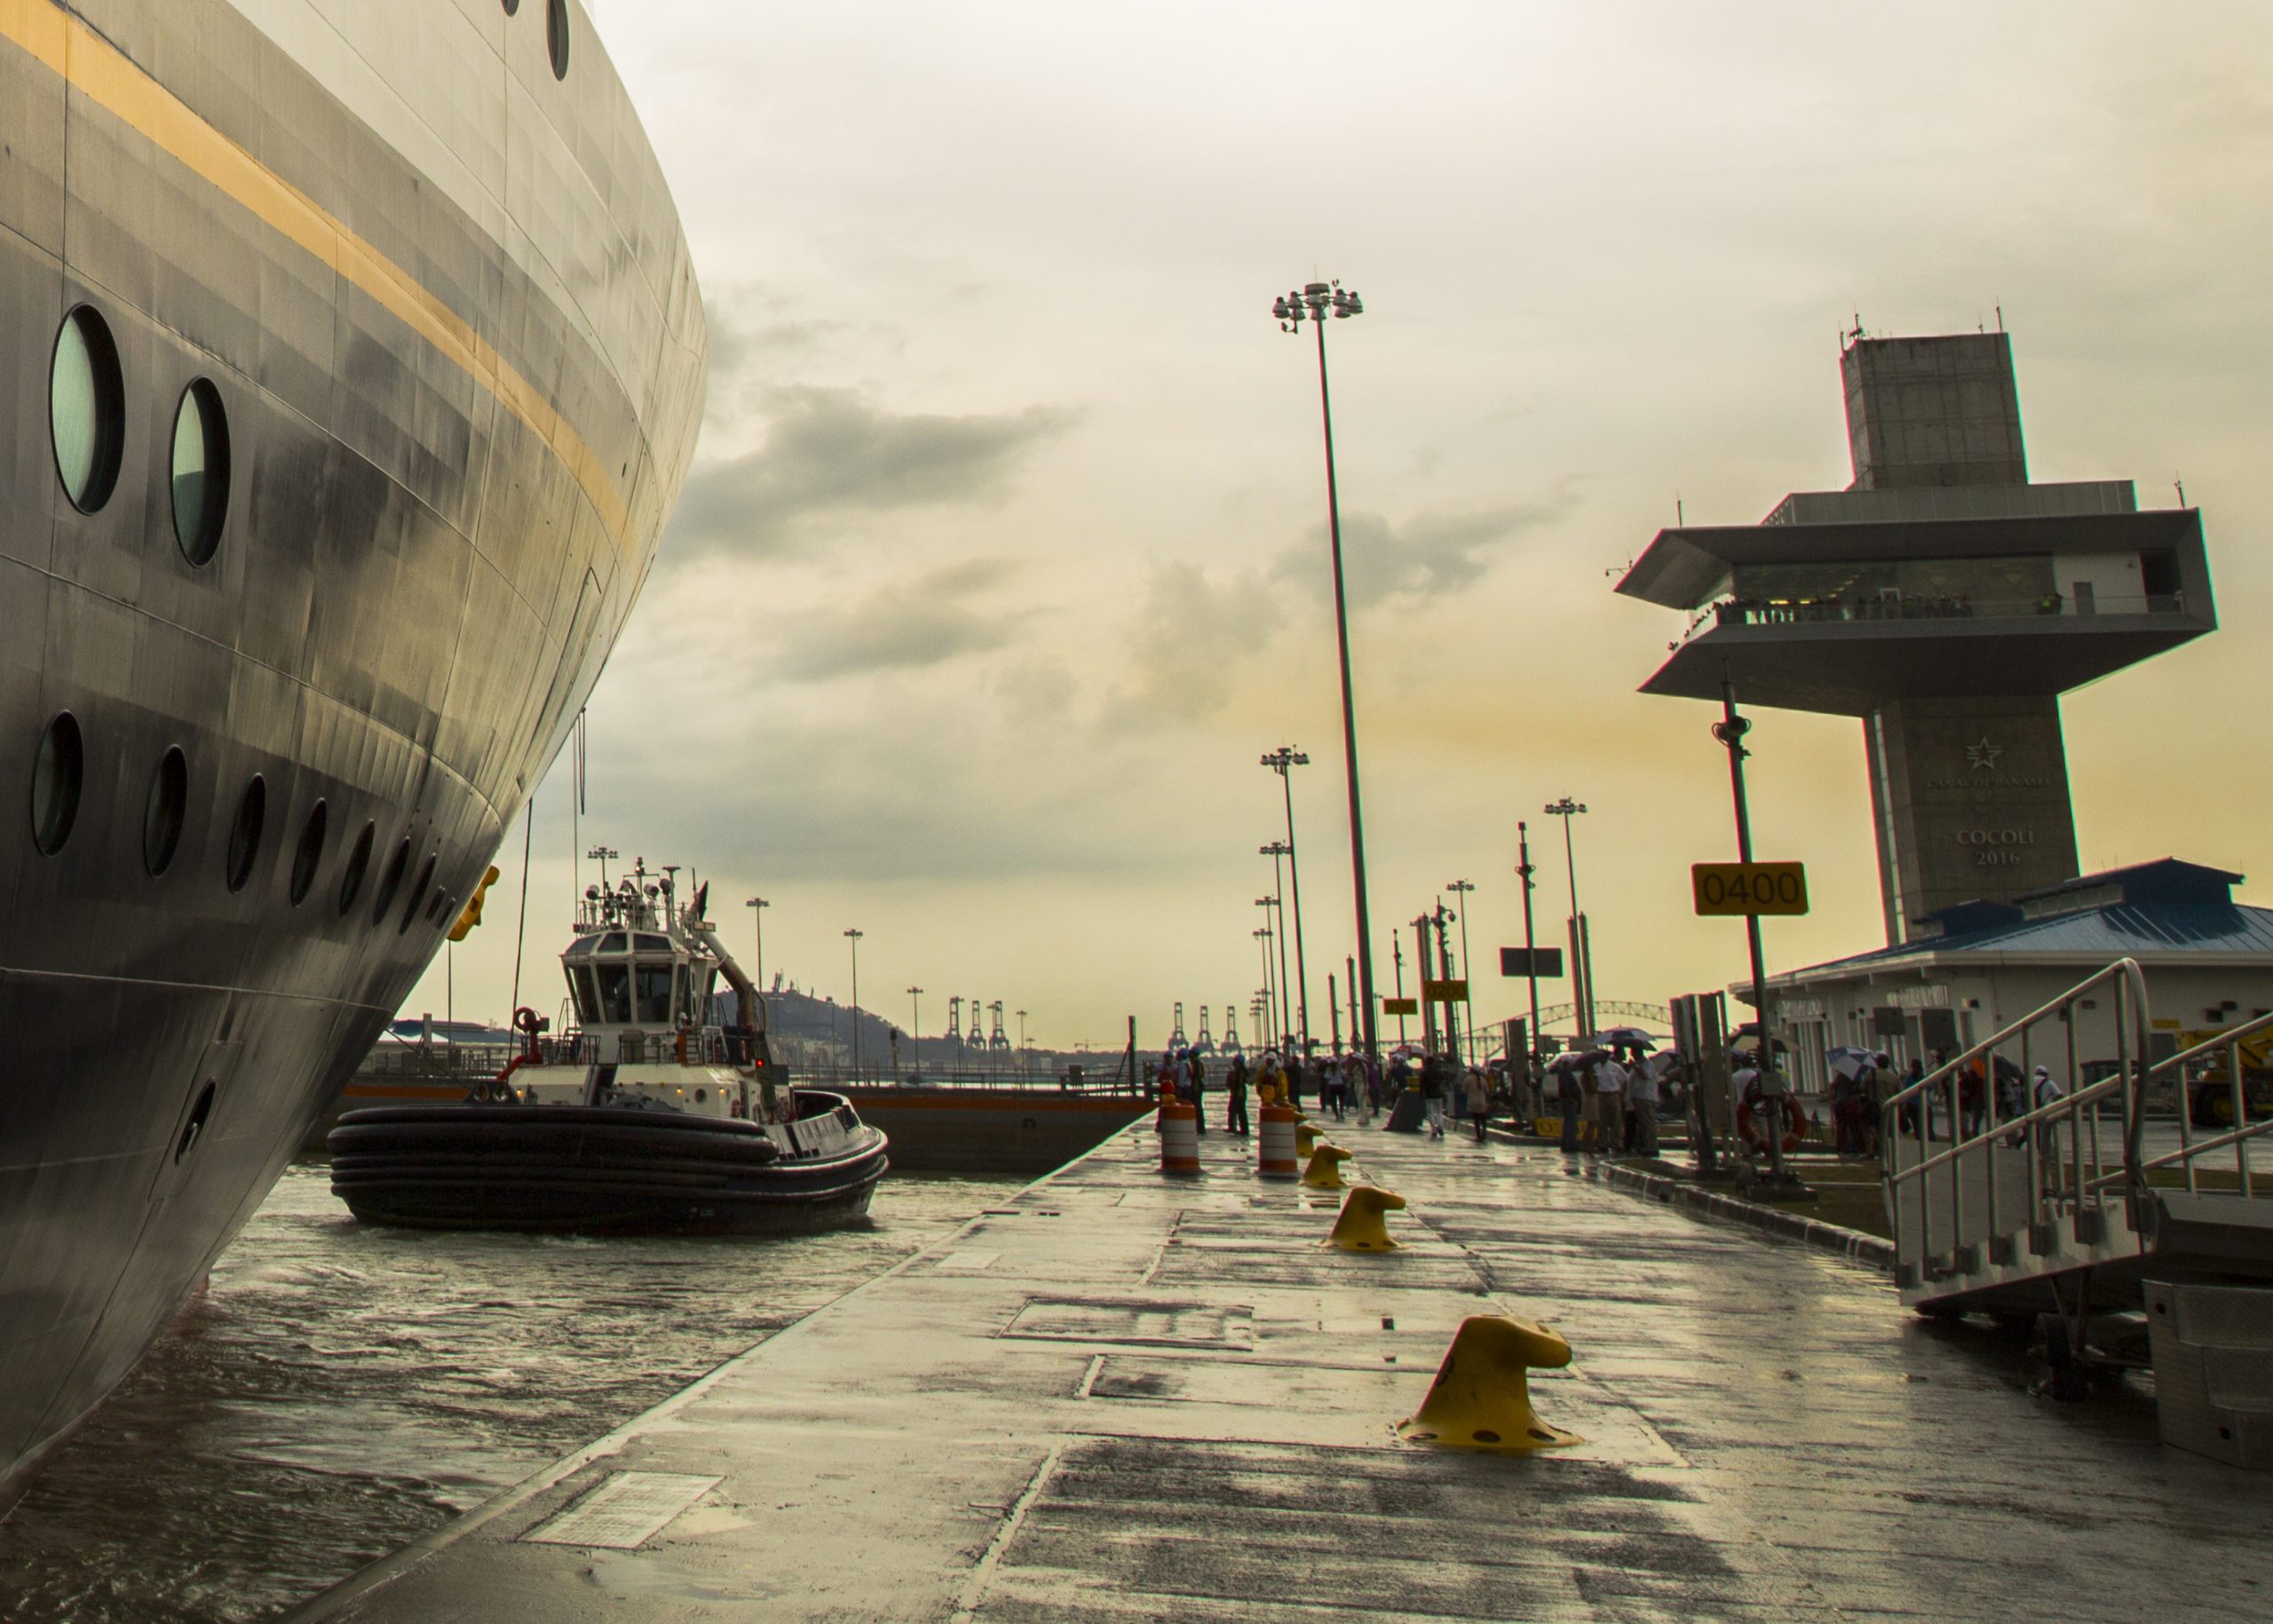 Taking a toll: Inchcape helps shipping beat the rush on tricky Panama Canal transits